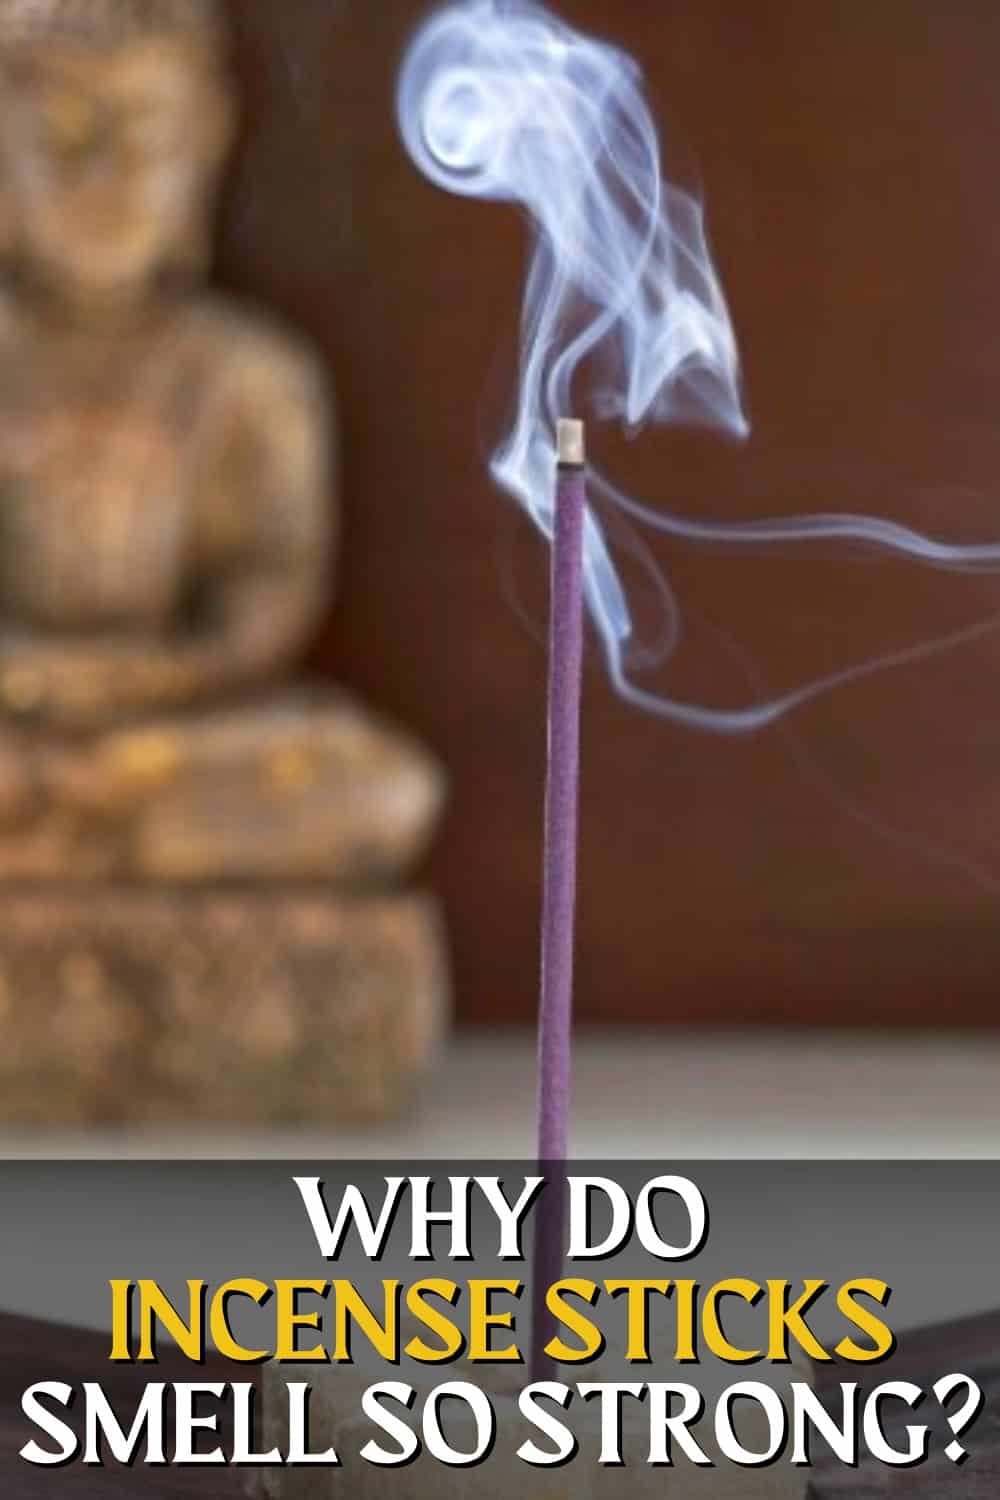 Incense releases highly volatile scent compounds